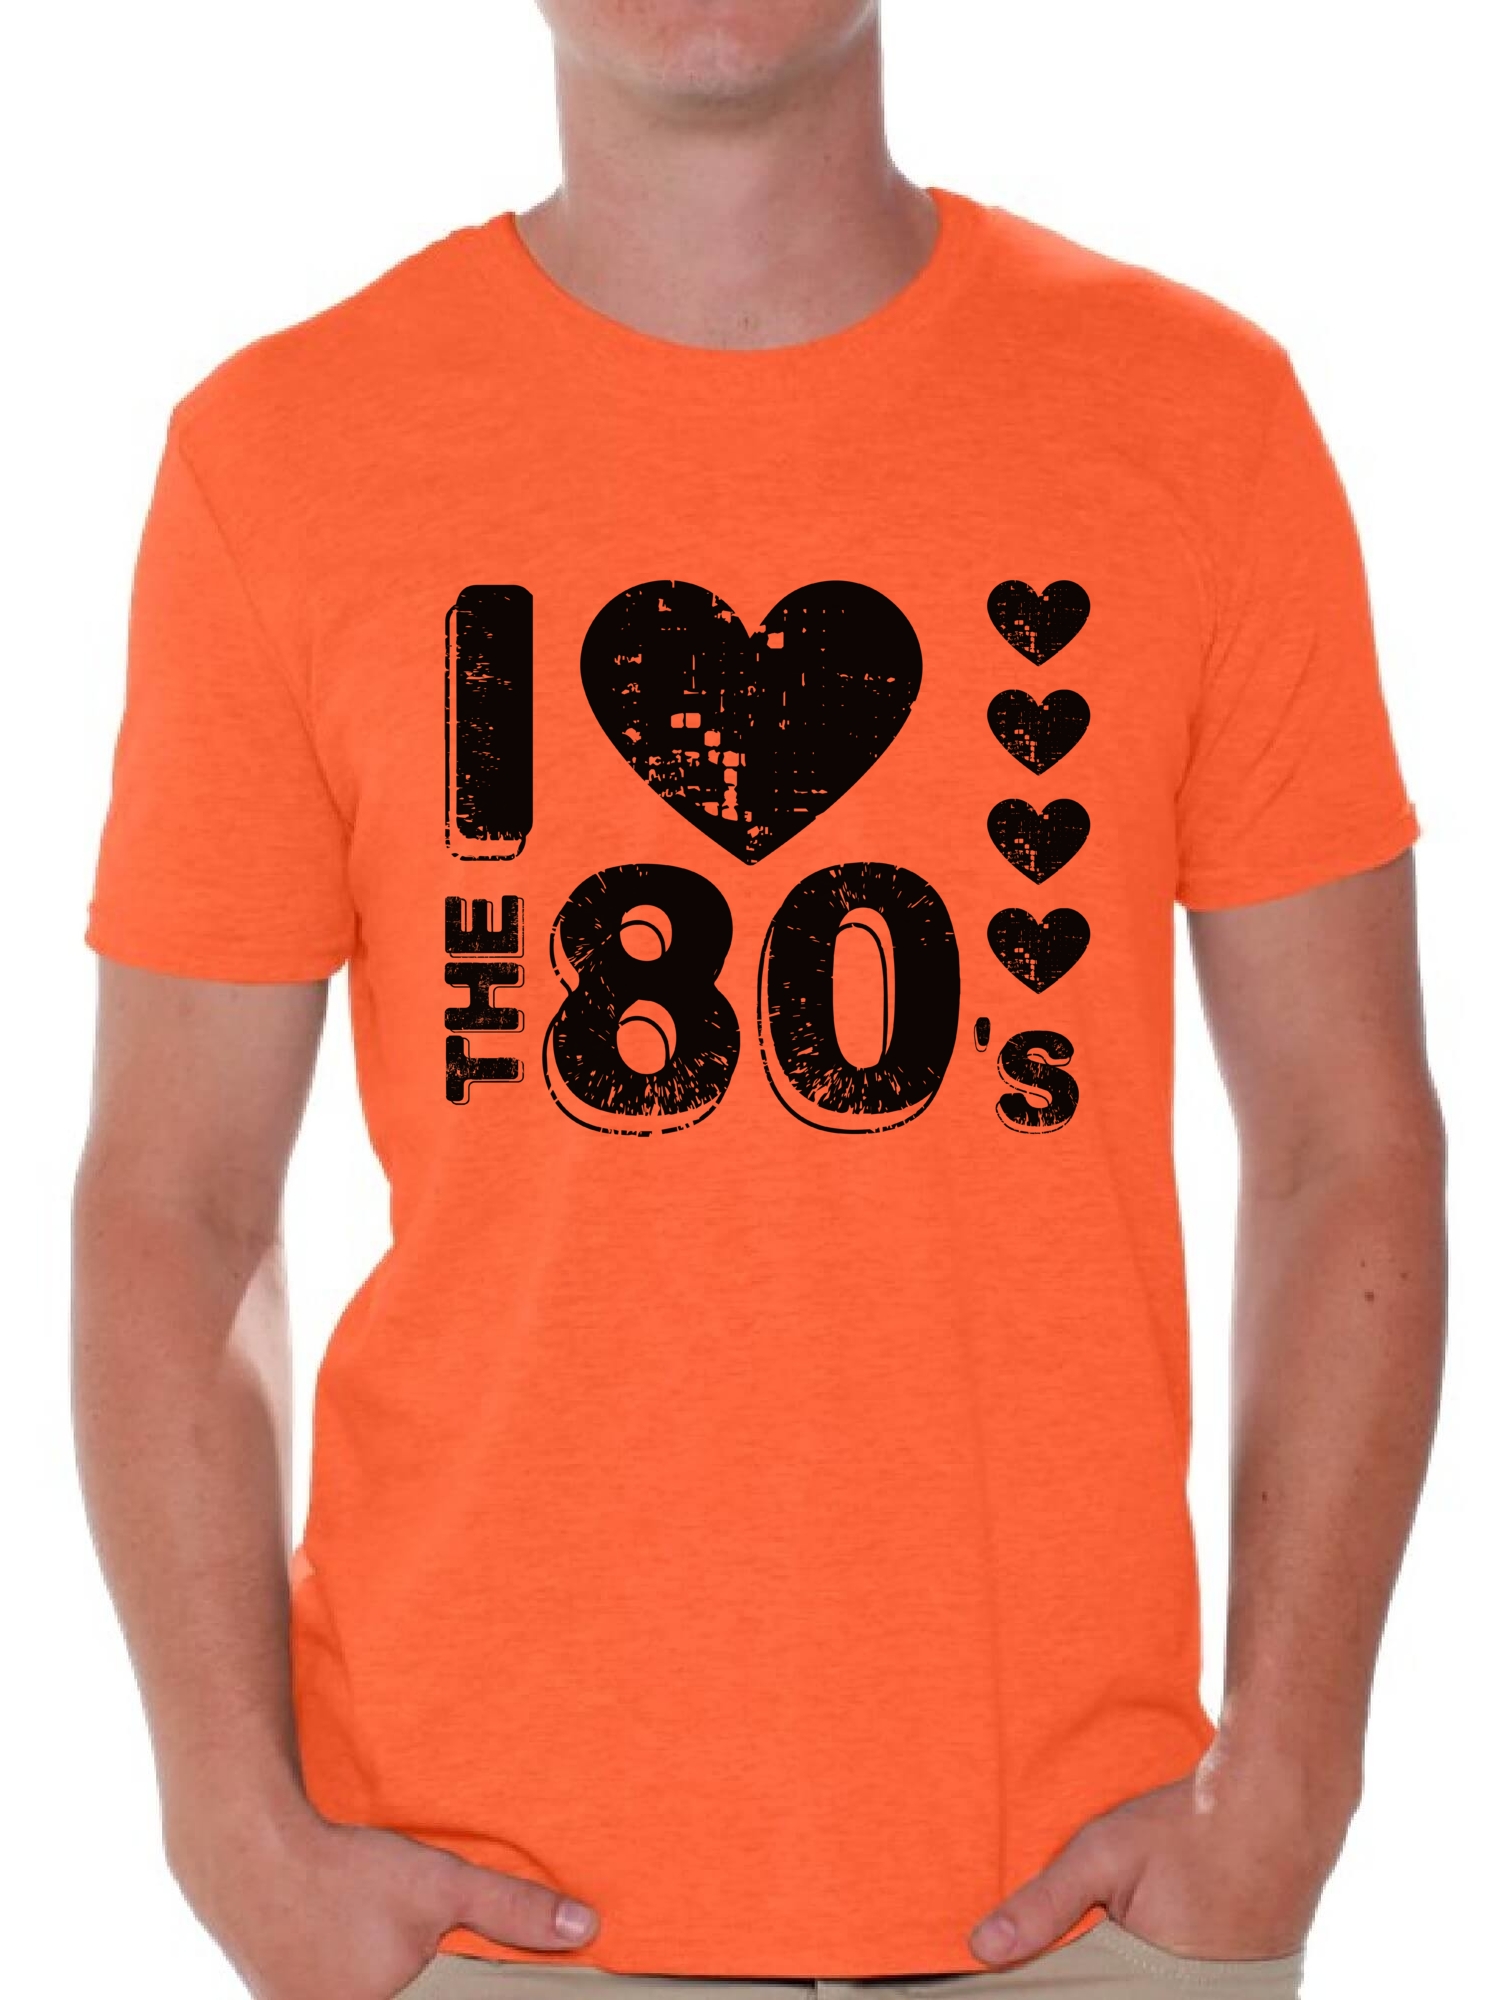 Awkward Styles I Love the 80s Shirt Black 80s Accessories 80s Rock T Shirt 80s T Shirt Retro Vintage Rock Concert T-Shirt 80s T Shirt for Men's 80s Costumes 80s Outfit for 80s Party - image 1 of 4